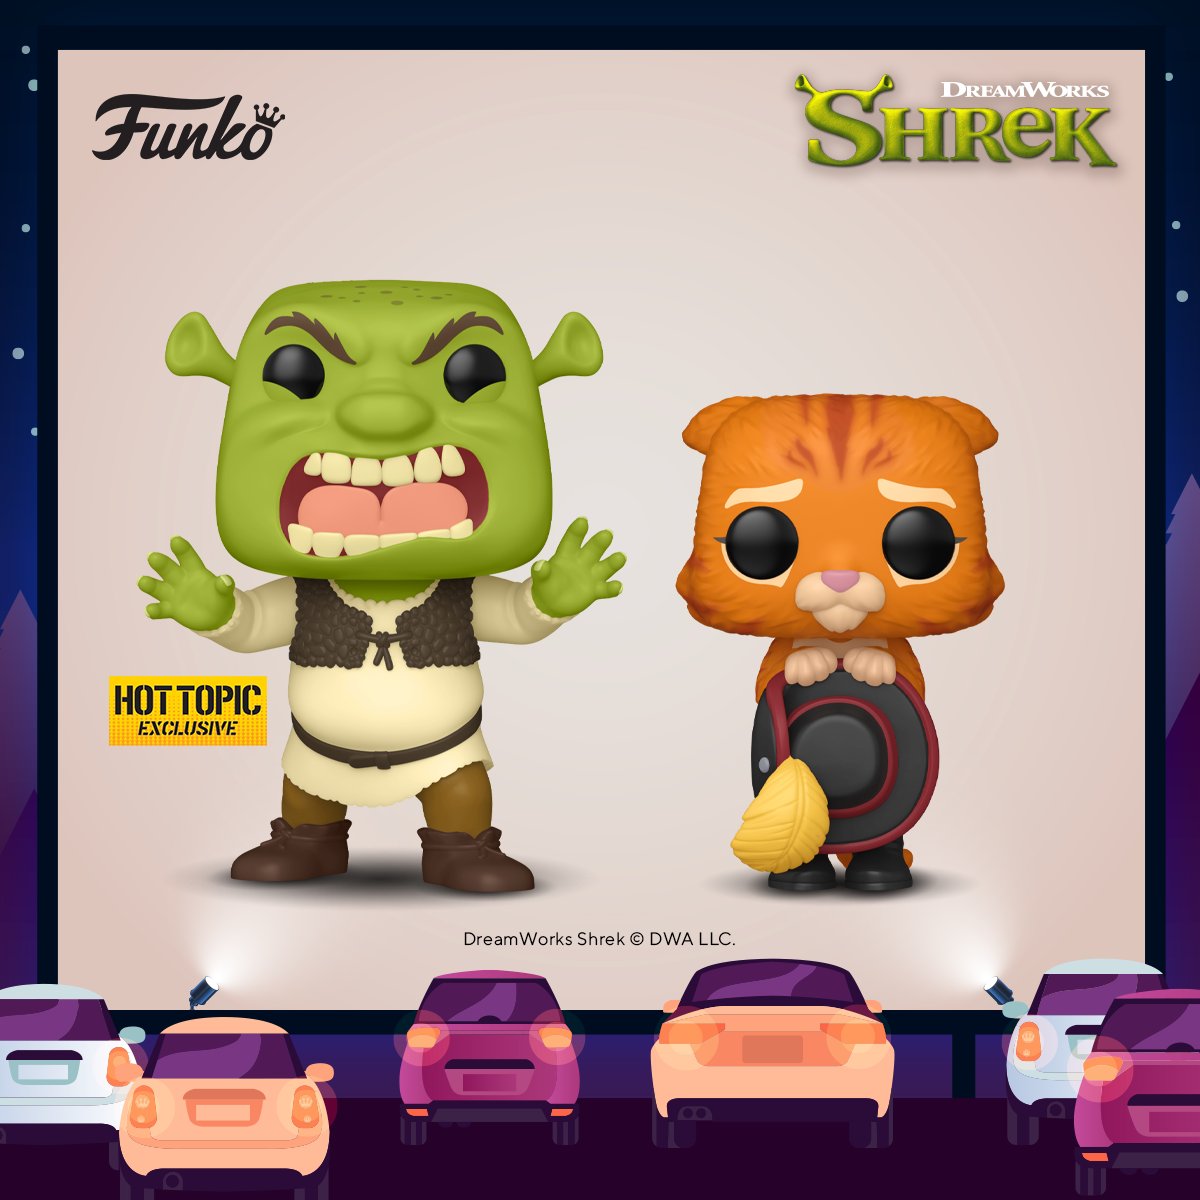 We are head ogre heels for this new Shrek Pop! collection! Pop! Puss in Boots is holding his hat, looking irresistibly cute with his heart melting expression and the exclusive Pop! Shrek poised to scare swamp intruders. bit.ly/3QYc1X6 #Shrek #FunkoPop